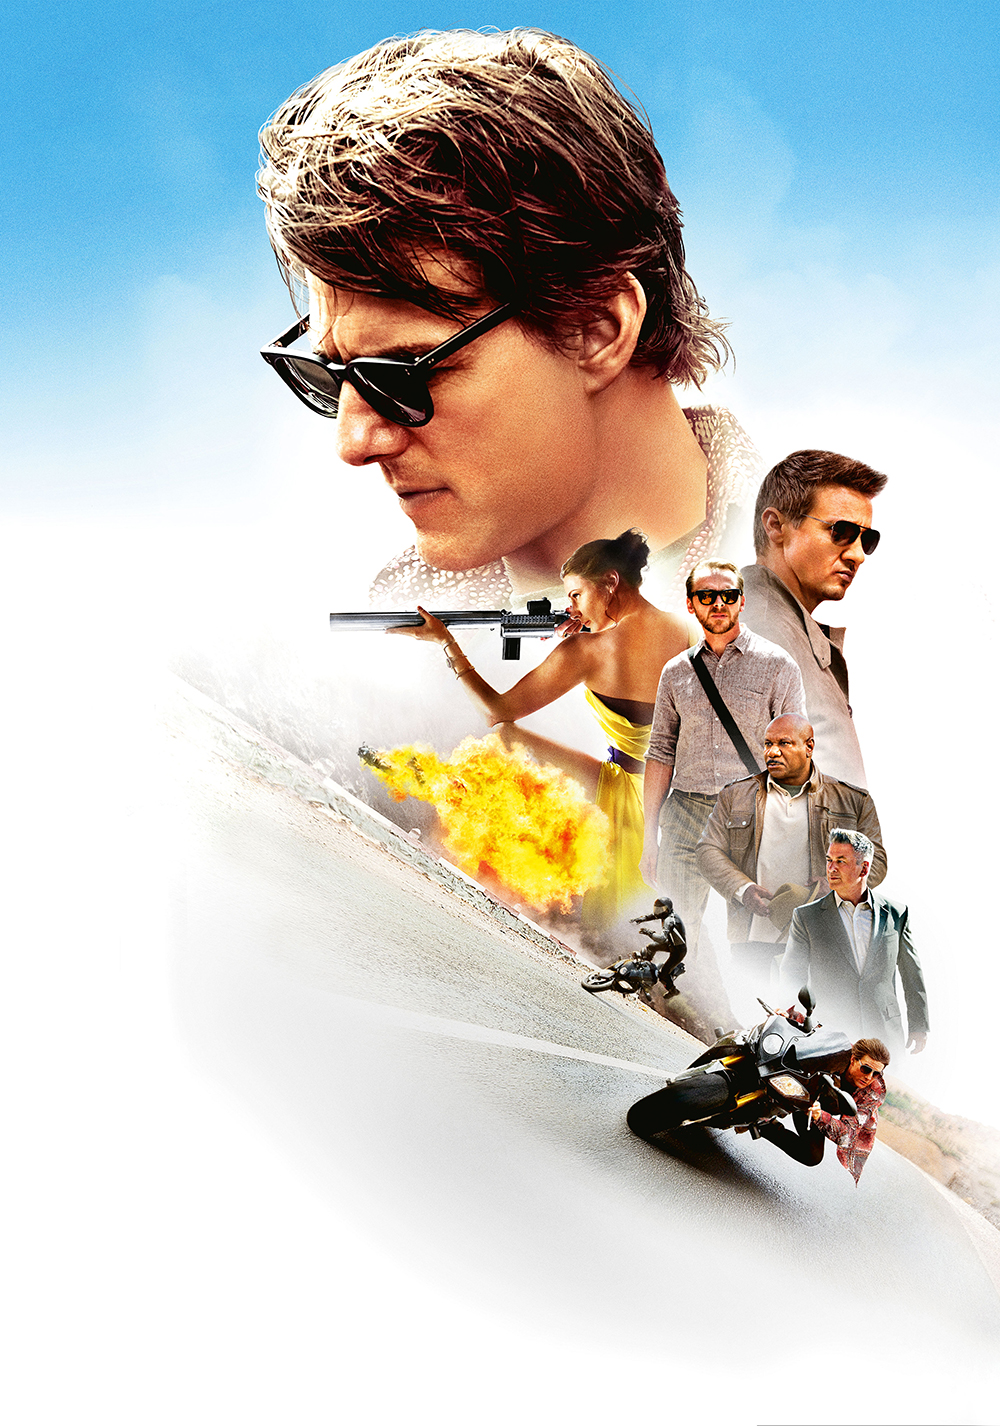 mission impossible 5-movie collection